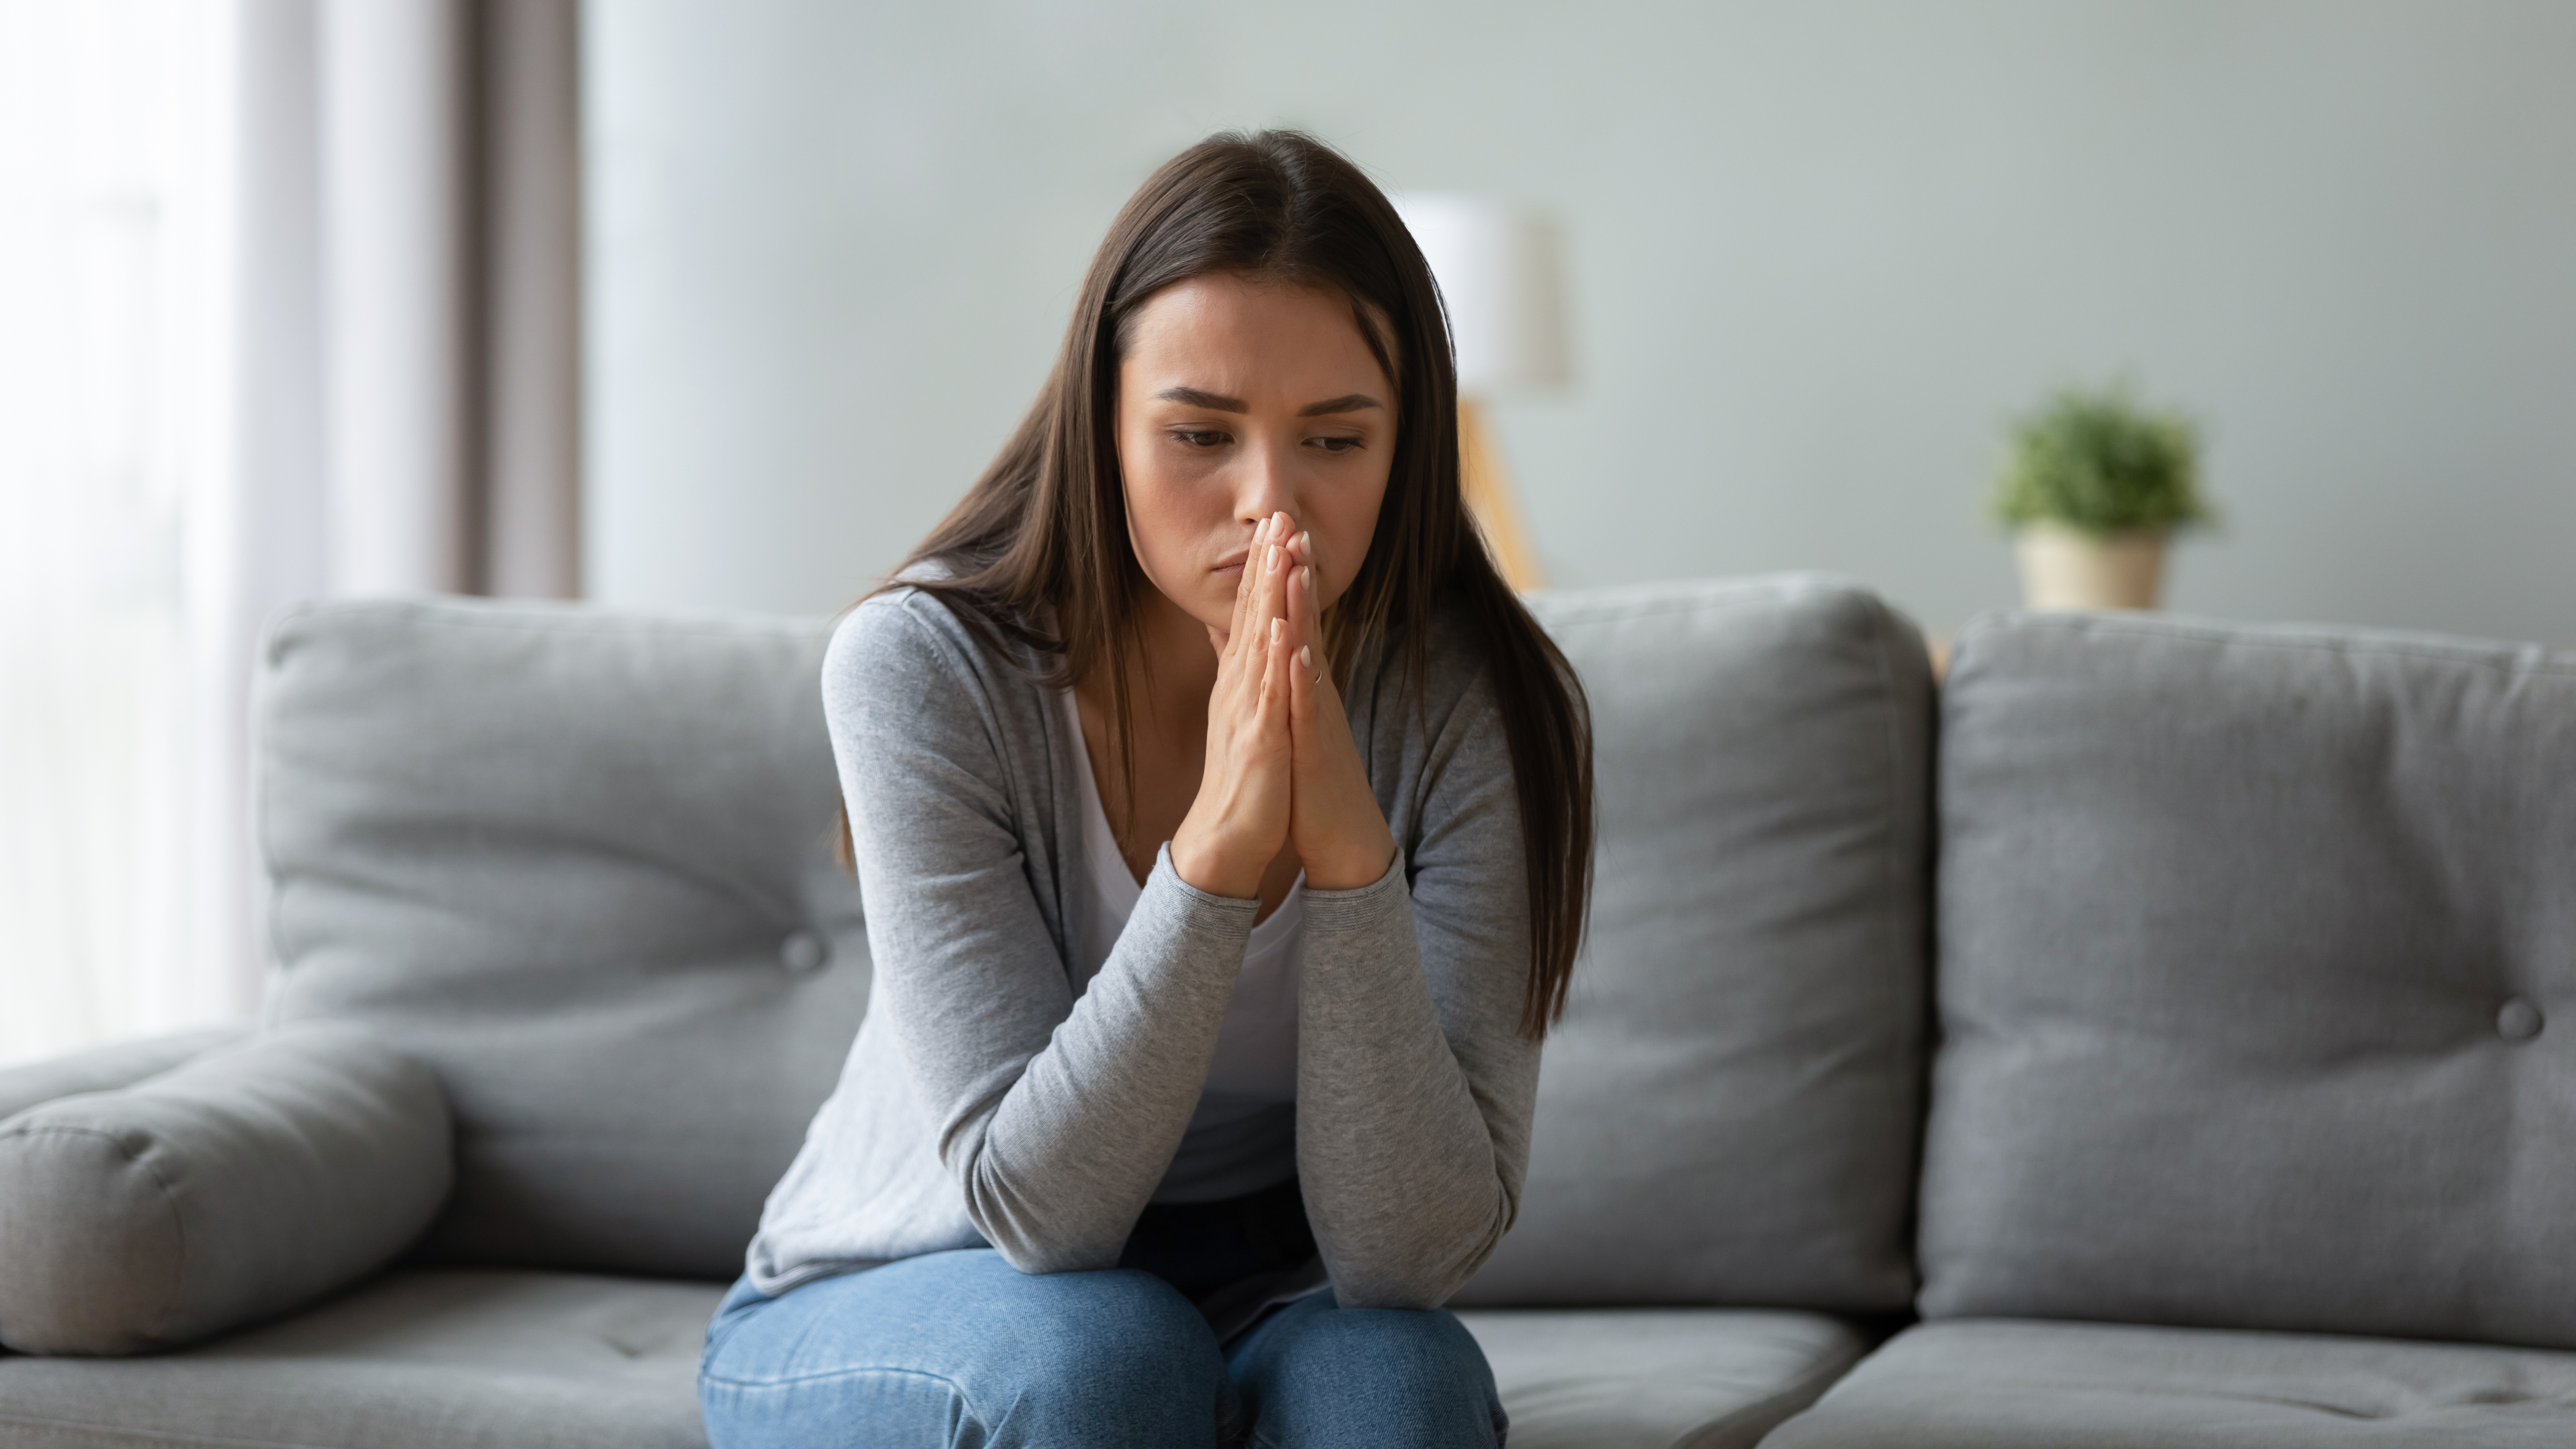 An unhappy young woman sitting on a sofa | Source: Shutterstock